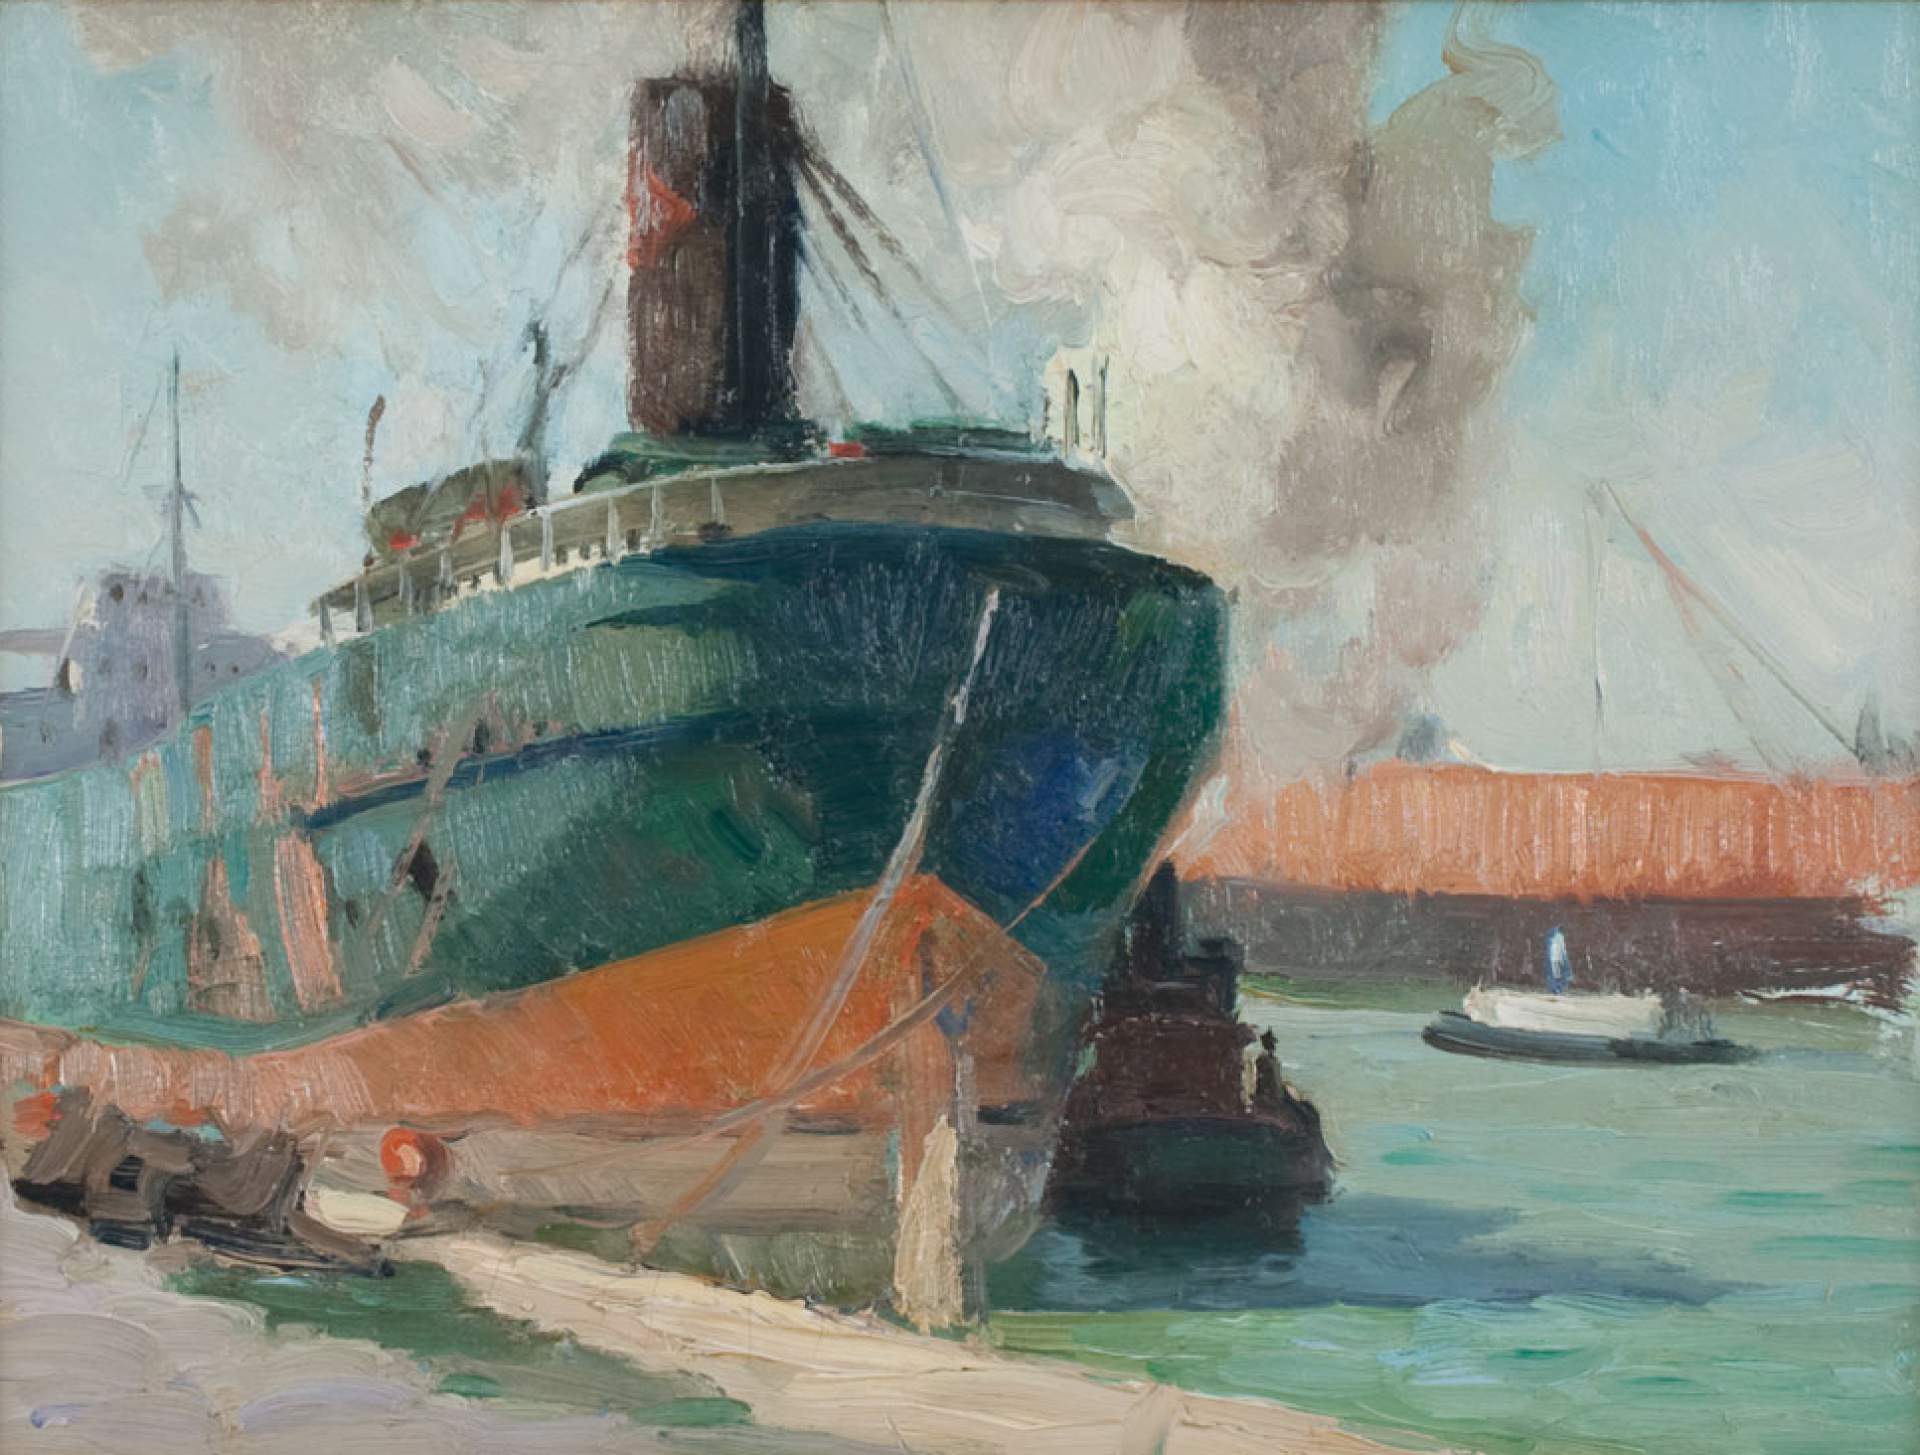 Untitled [Ship with tugboats in Buffalo Harbor]